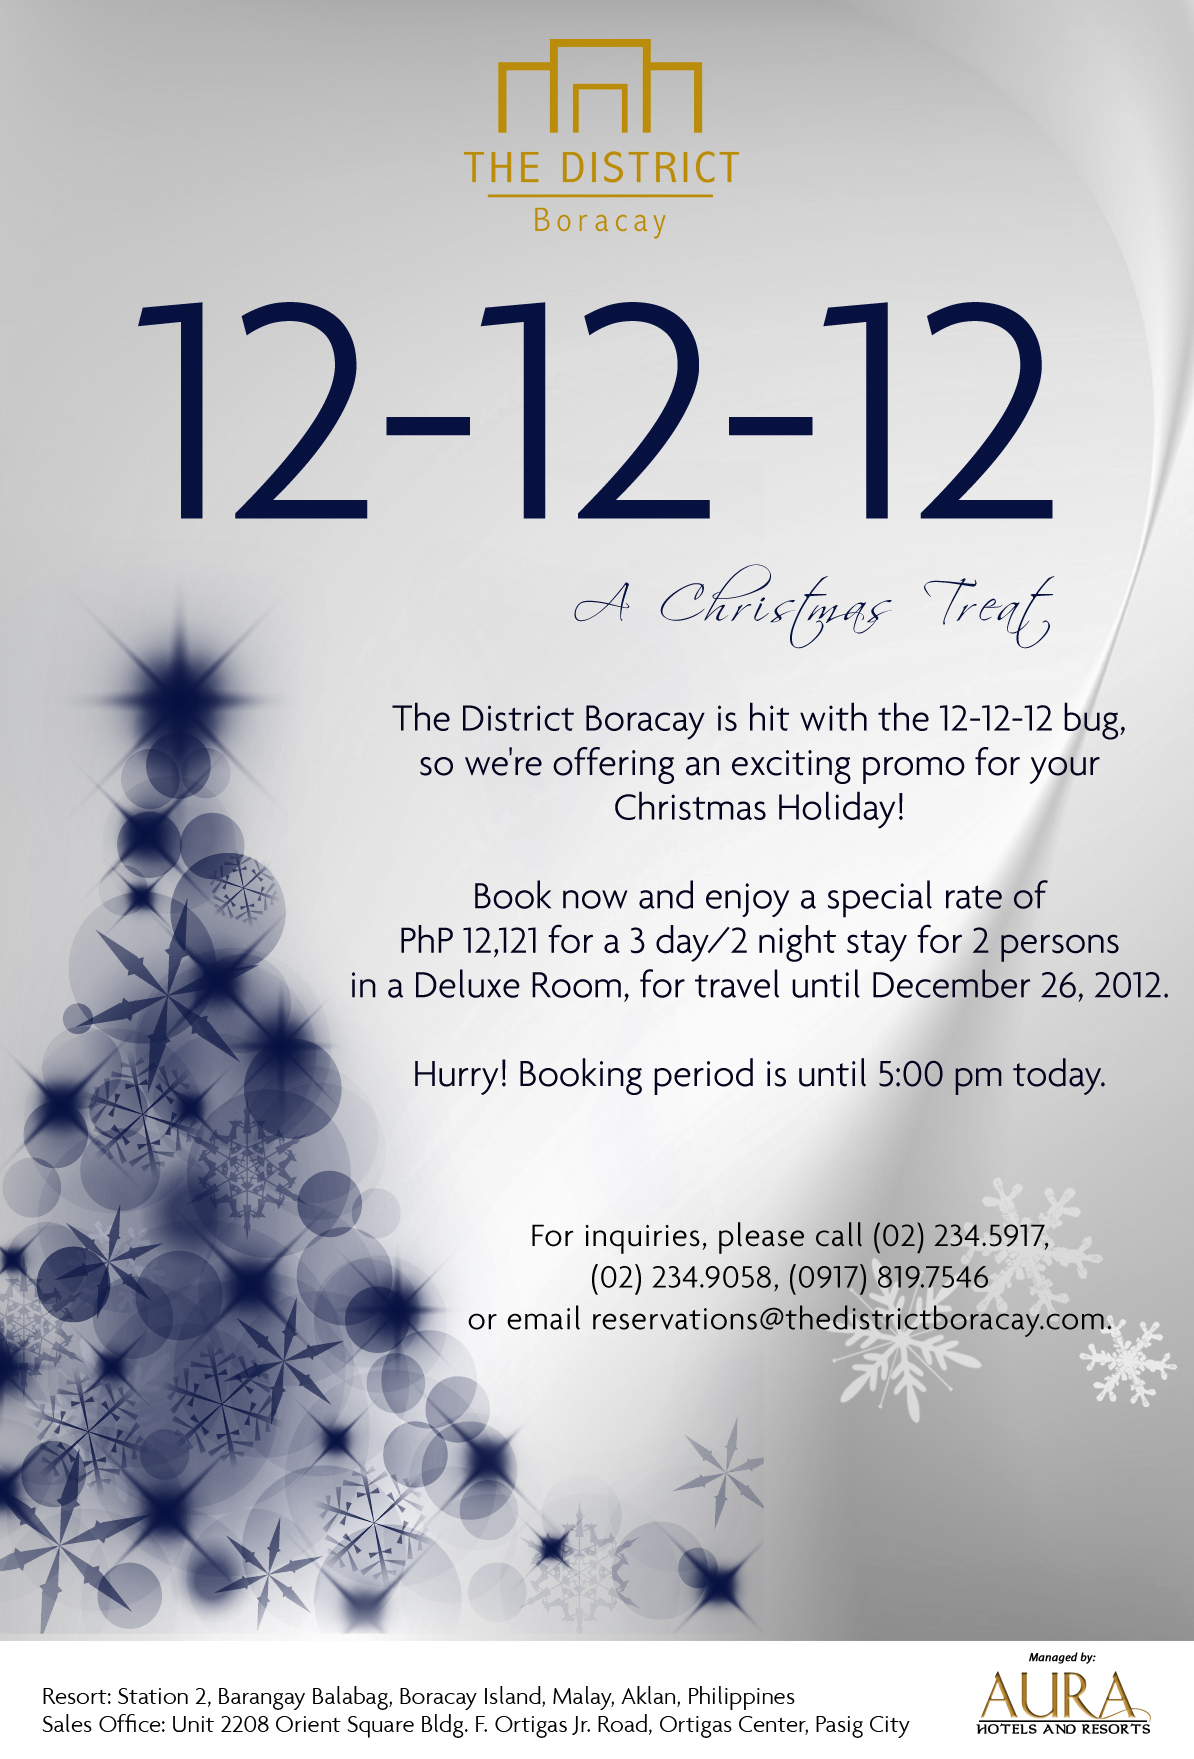 12-12-12 Promo at The District Boracay!